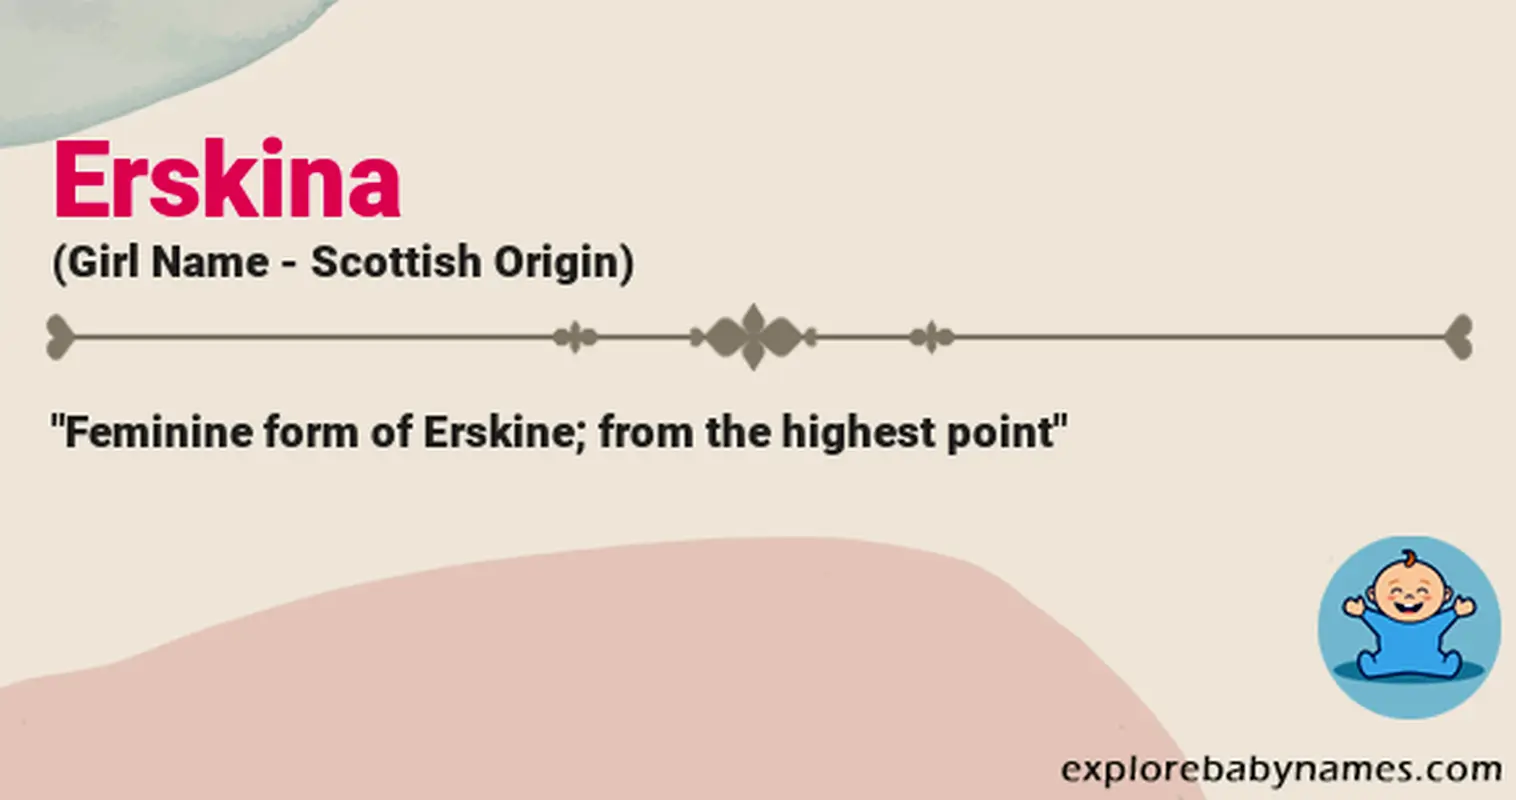 Meaning of Erskina